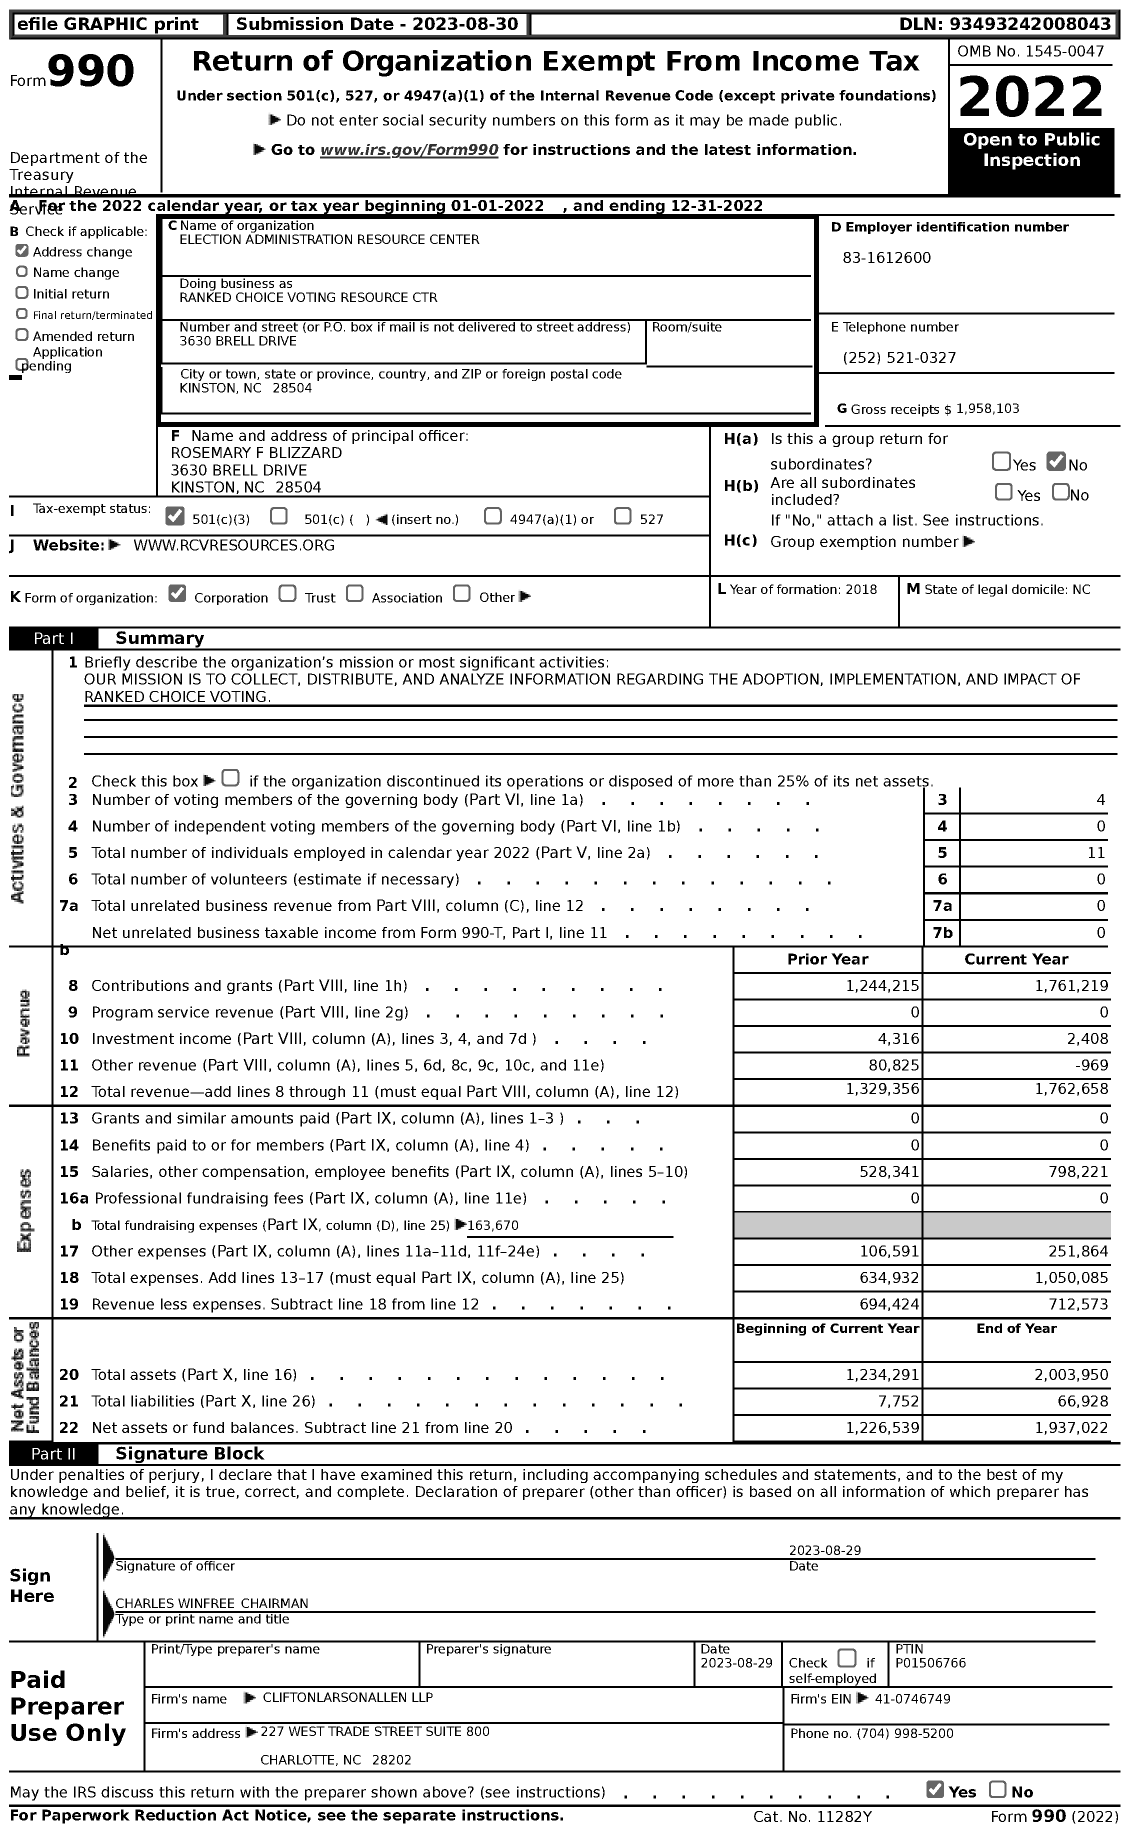 Image of first page of 2022 Form 990 for Ranked Choice Voting Resource Center